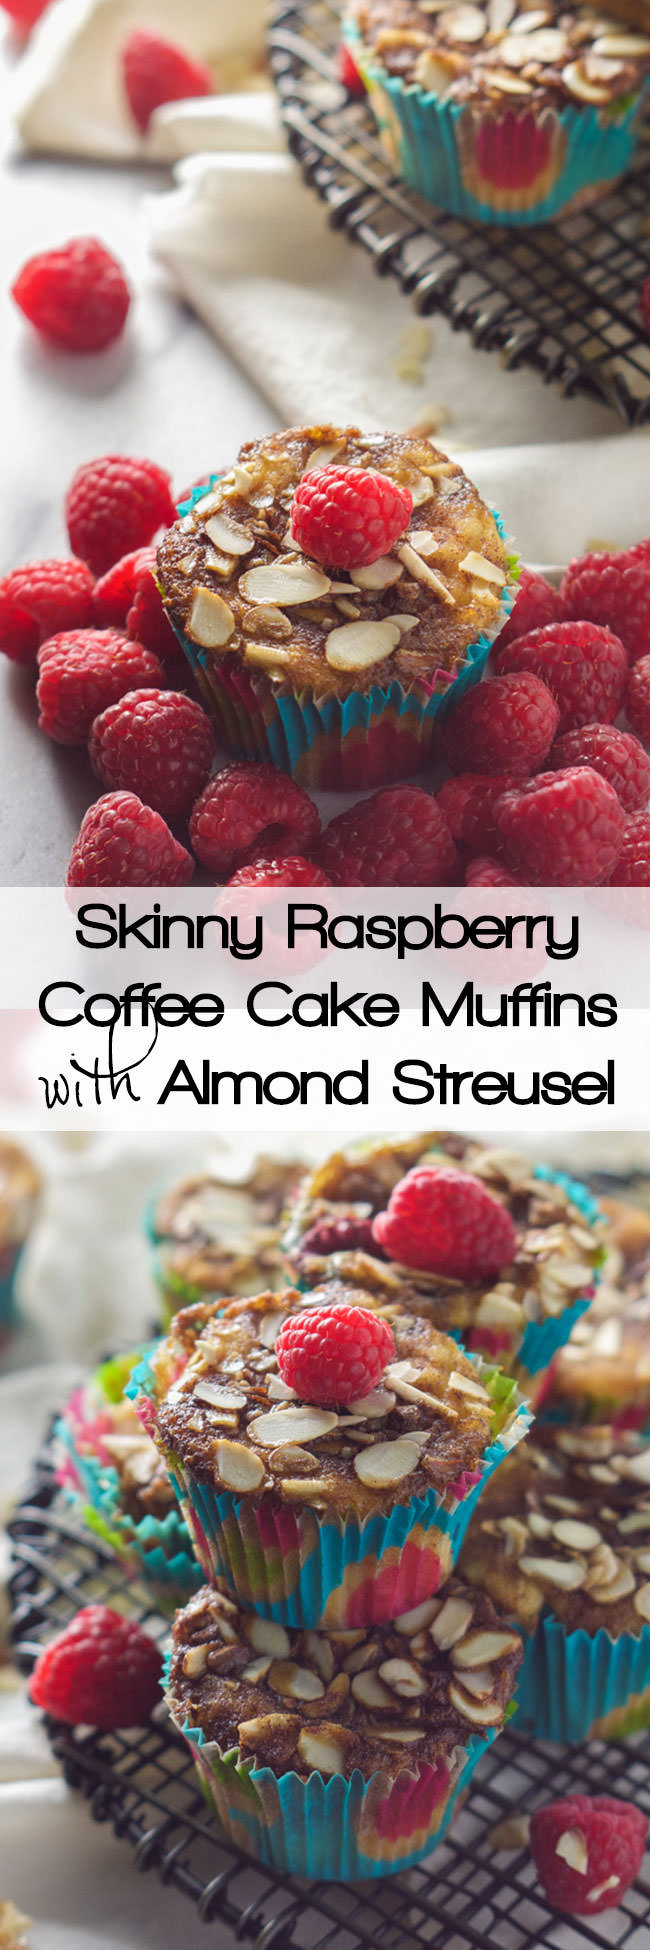 Sweet and tender, these Skinny Raspberry Coffee Cake Muffins with Almond Streusel are secretly healthy and bursting with flavor! Something worth getting up for each morning![